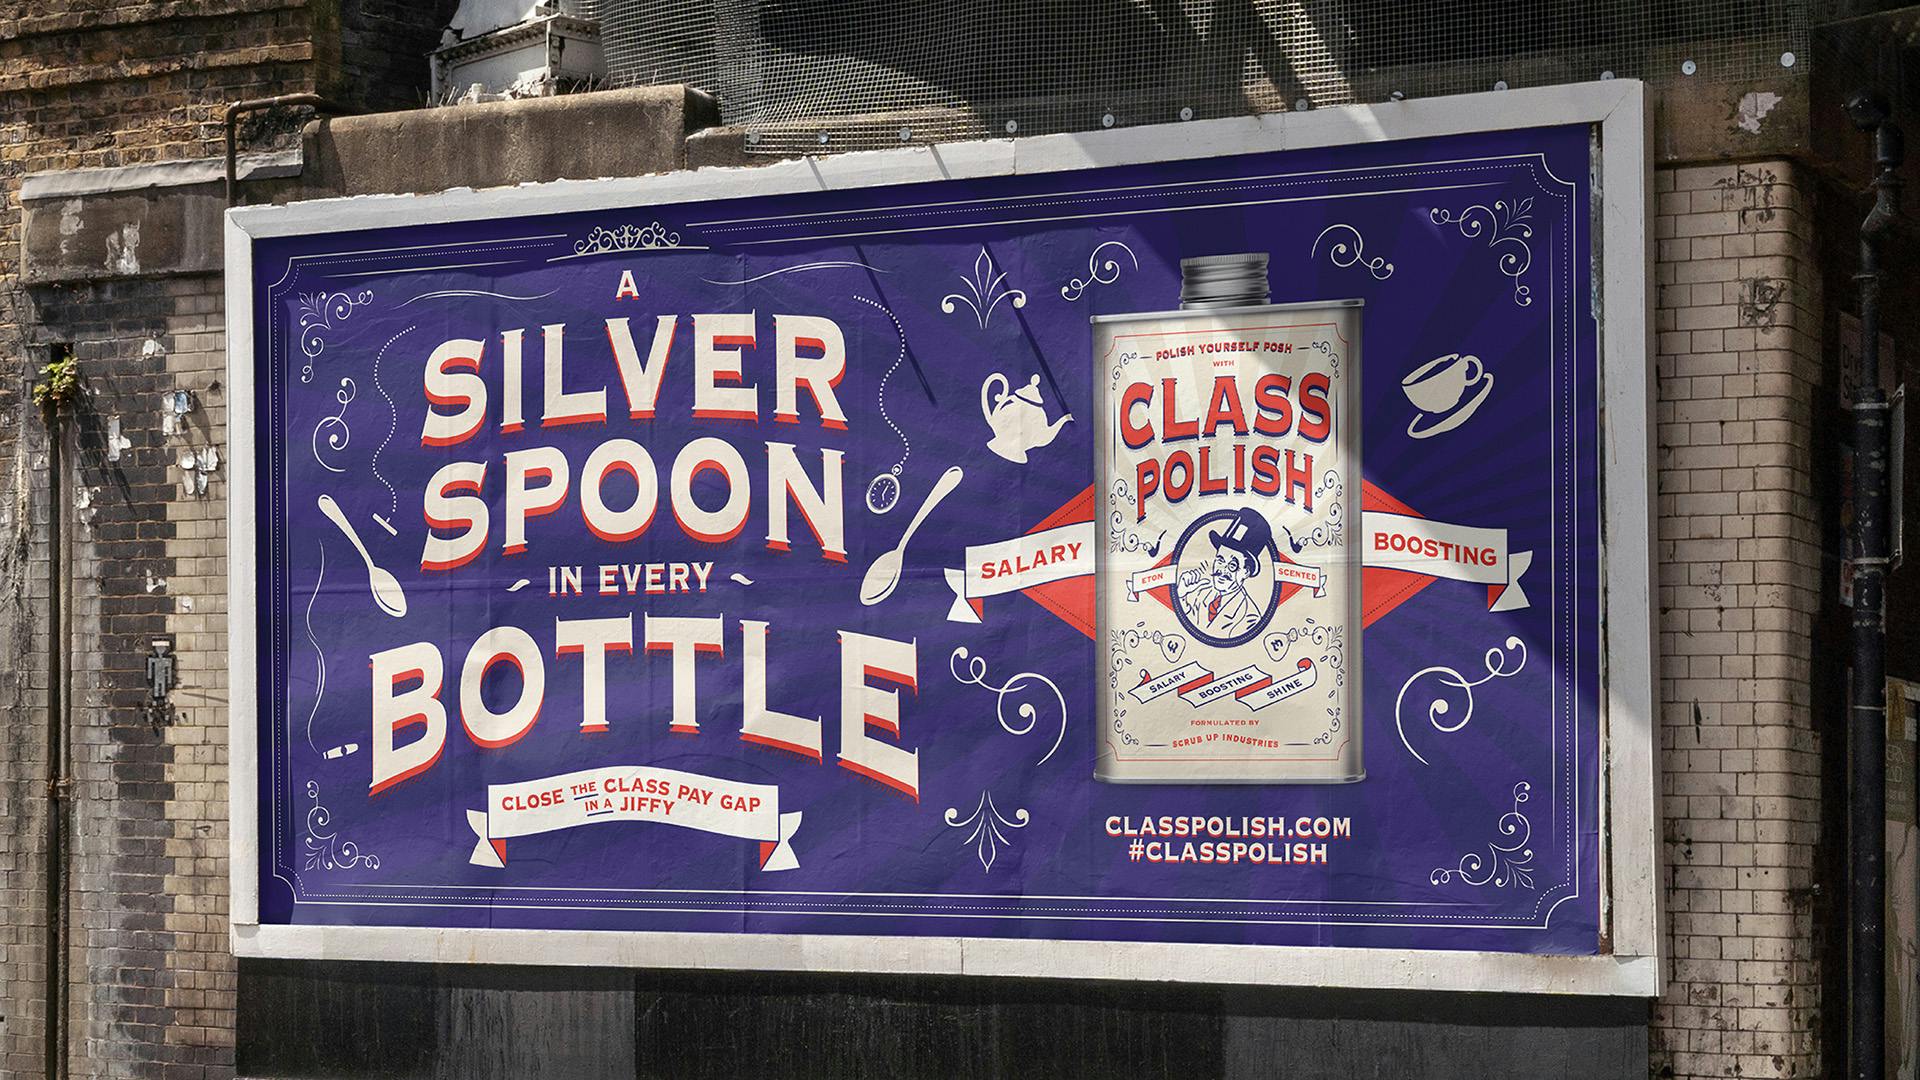 Image shows an out-of-home advertisement by Creature London that reads 'A Silver Spoon in every Bottle' and a contanier labelled 'Class Polish'